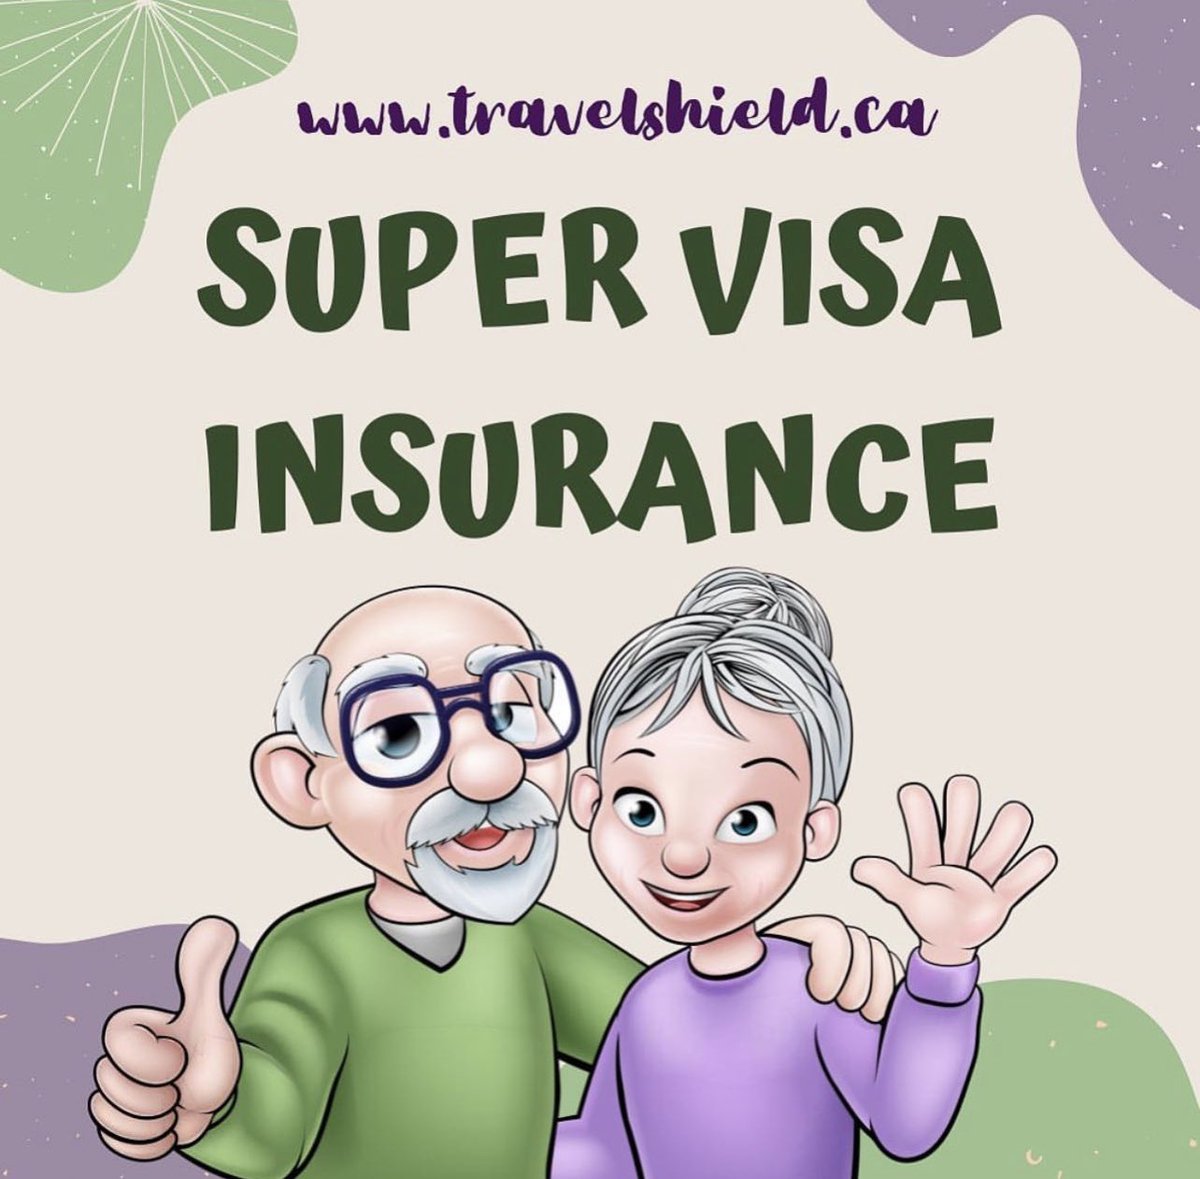 Most affordable Super Visa Insurance to Canada .
travelshield.ca/svi.php?uid=TS…  For more information you can reach us at 1 (866) 517-0606 #visit #visitcanada#toronto #insurance #staysafe #retirementplanning #supervisa #canada #vaccine #healthinsurance #bestrates #bestplans